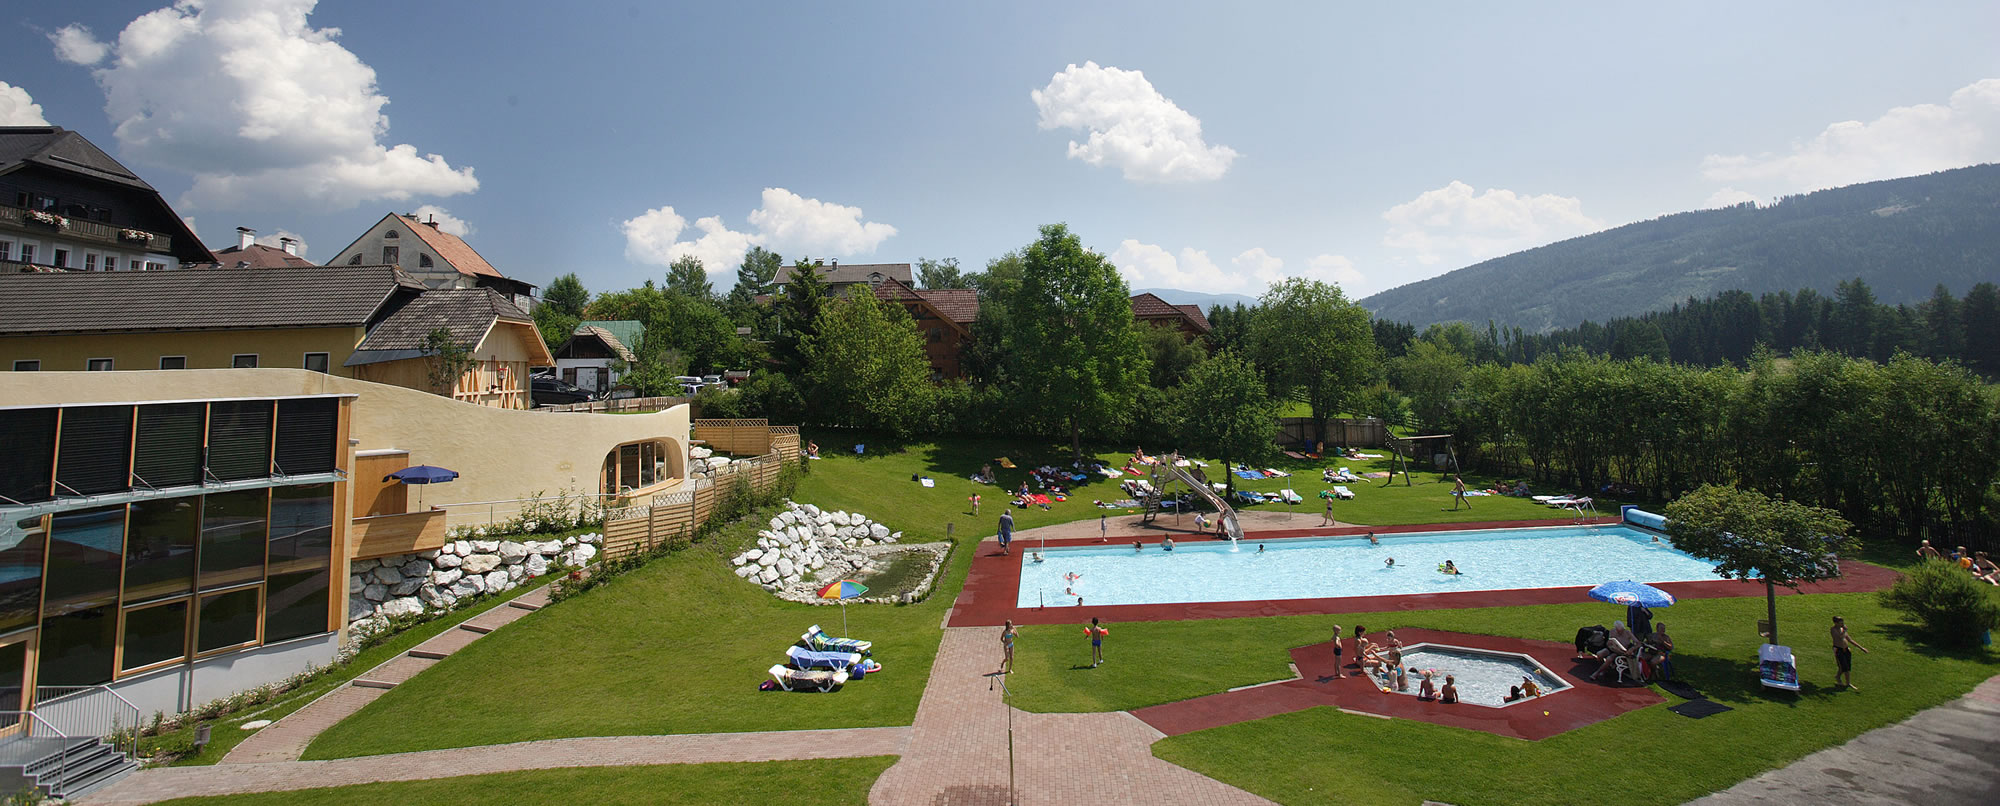 Summer holiday activities in Lungau